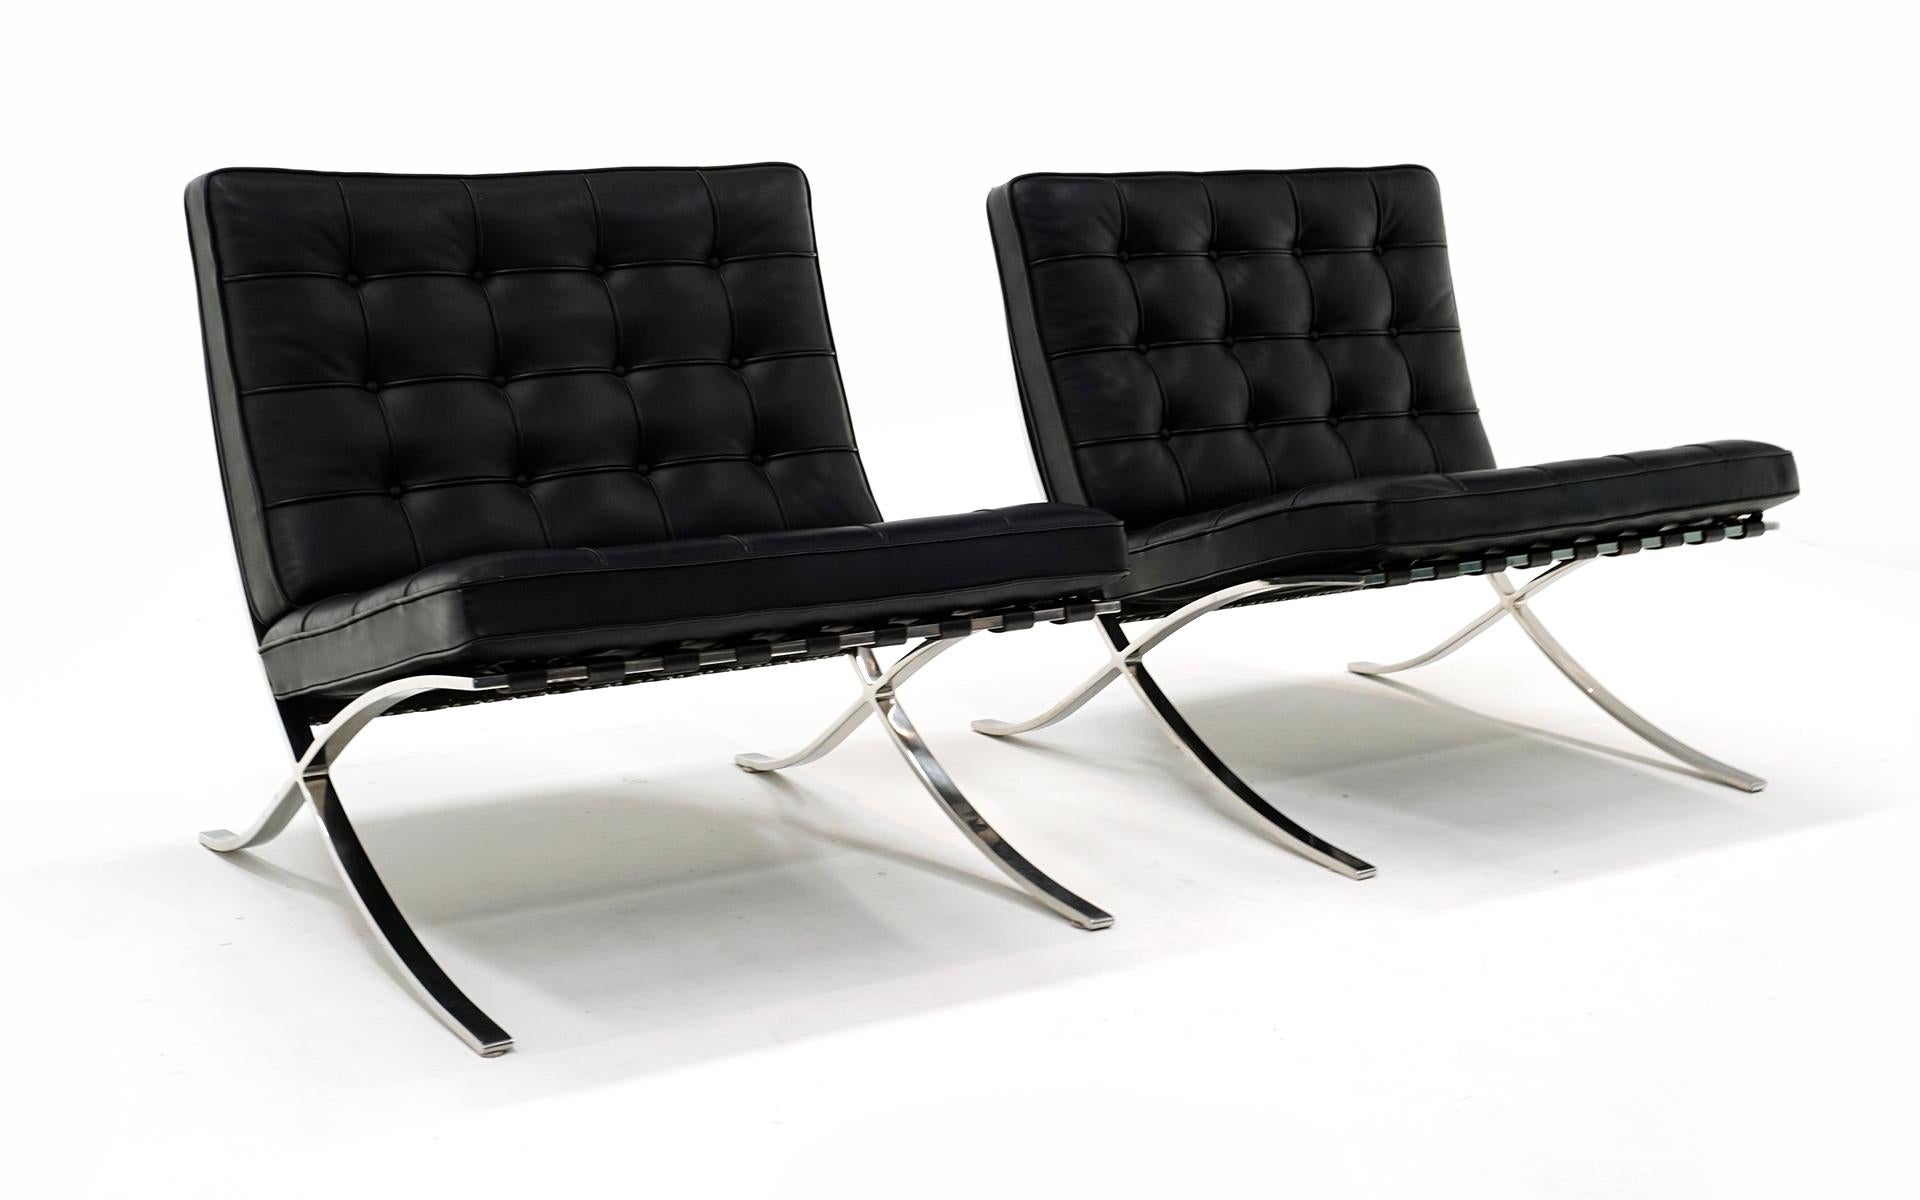 Pair / Two black leather and stainless steel Barcelona Chairs designed by Ludwig Mies van der Rohe and produced by Knoll. Each example is signed with the Knoll Studio markings. Very few signs of use. Light scratches to the tops of the stainless